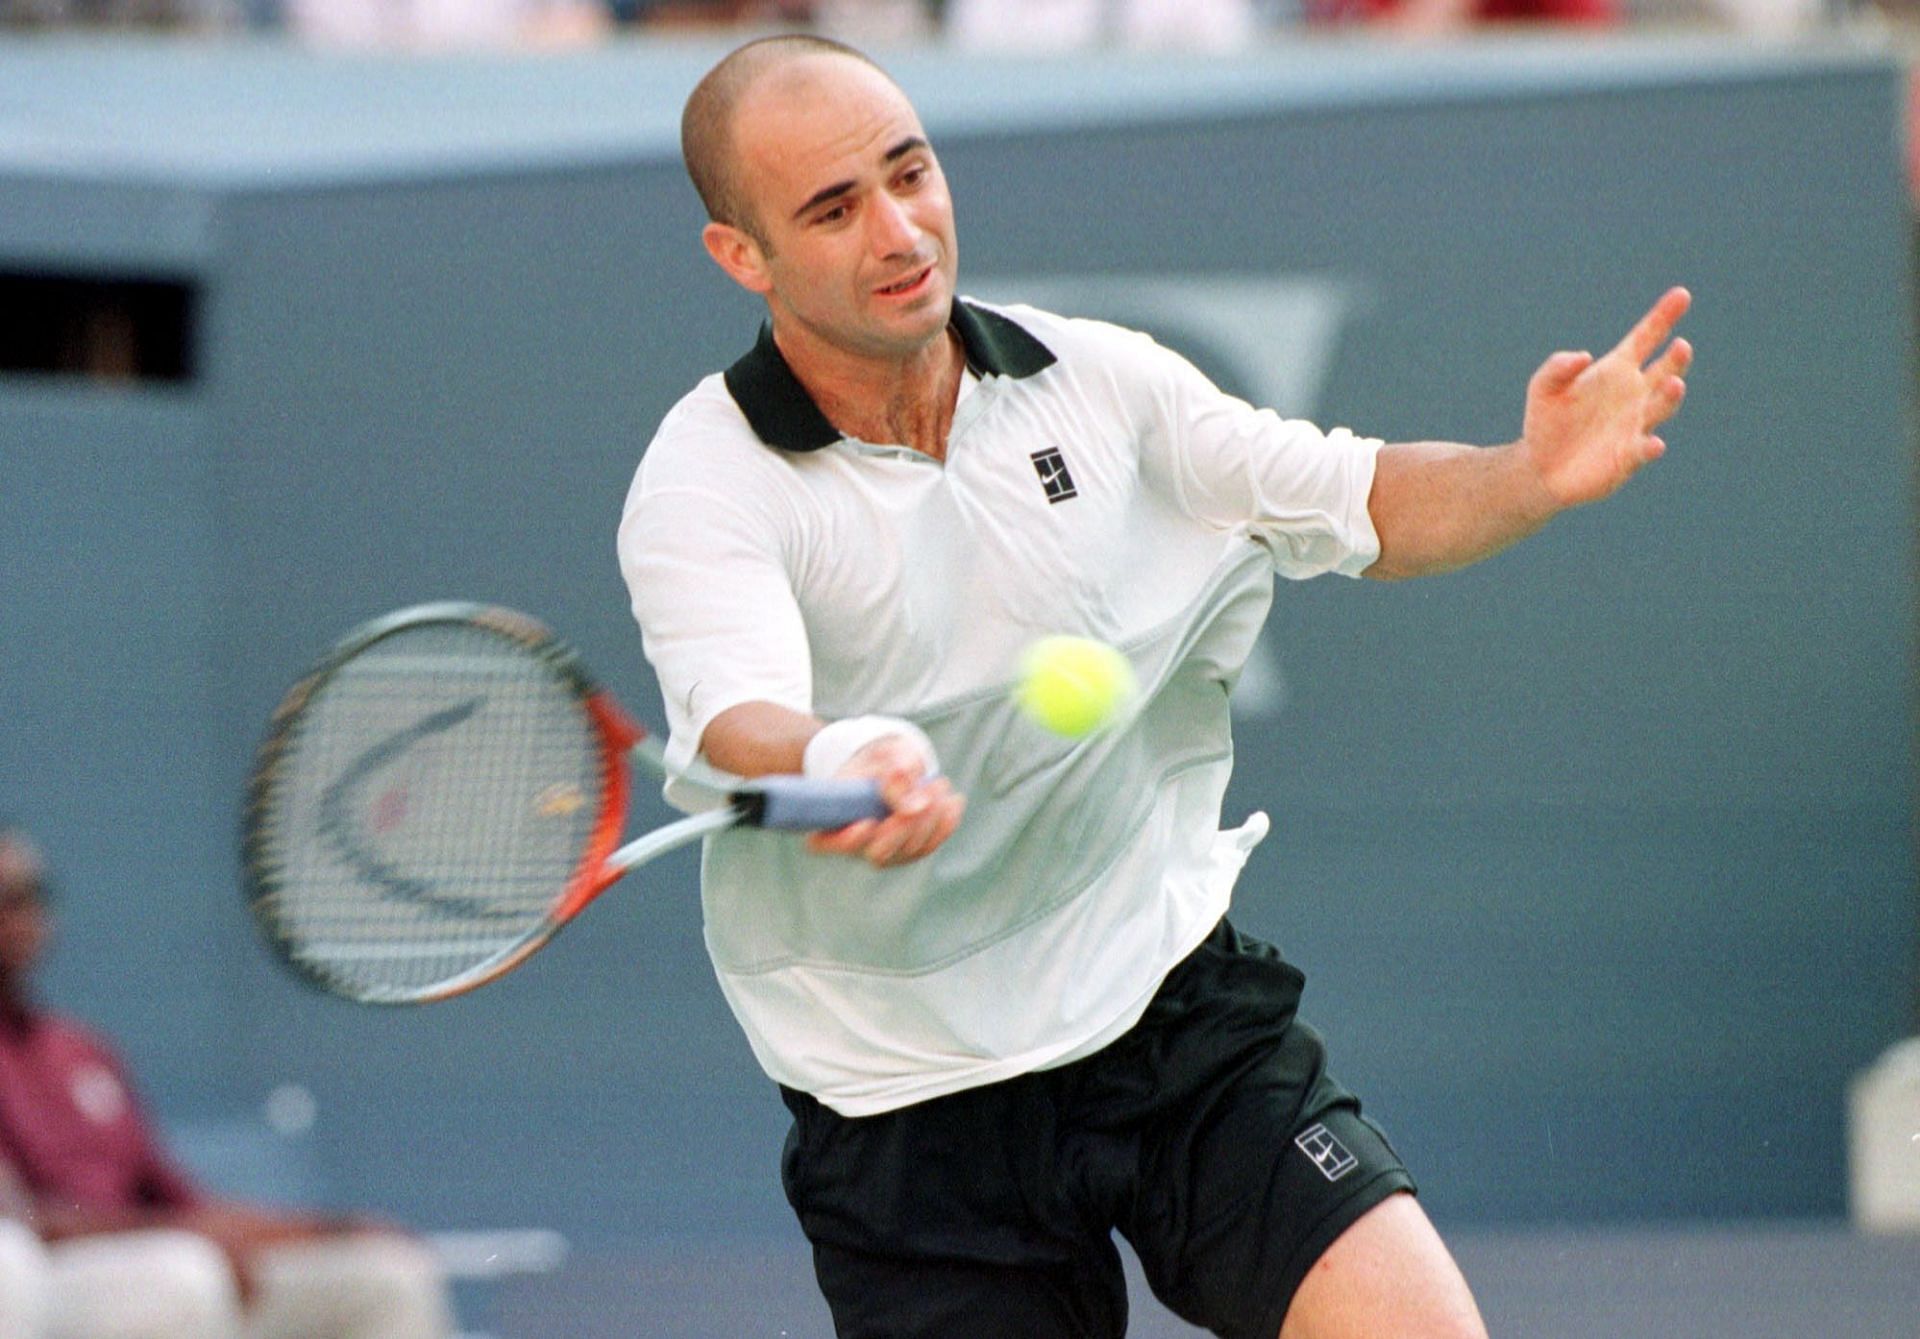 Andre Agassi in action at the 1999 US Open.